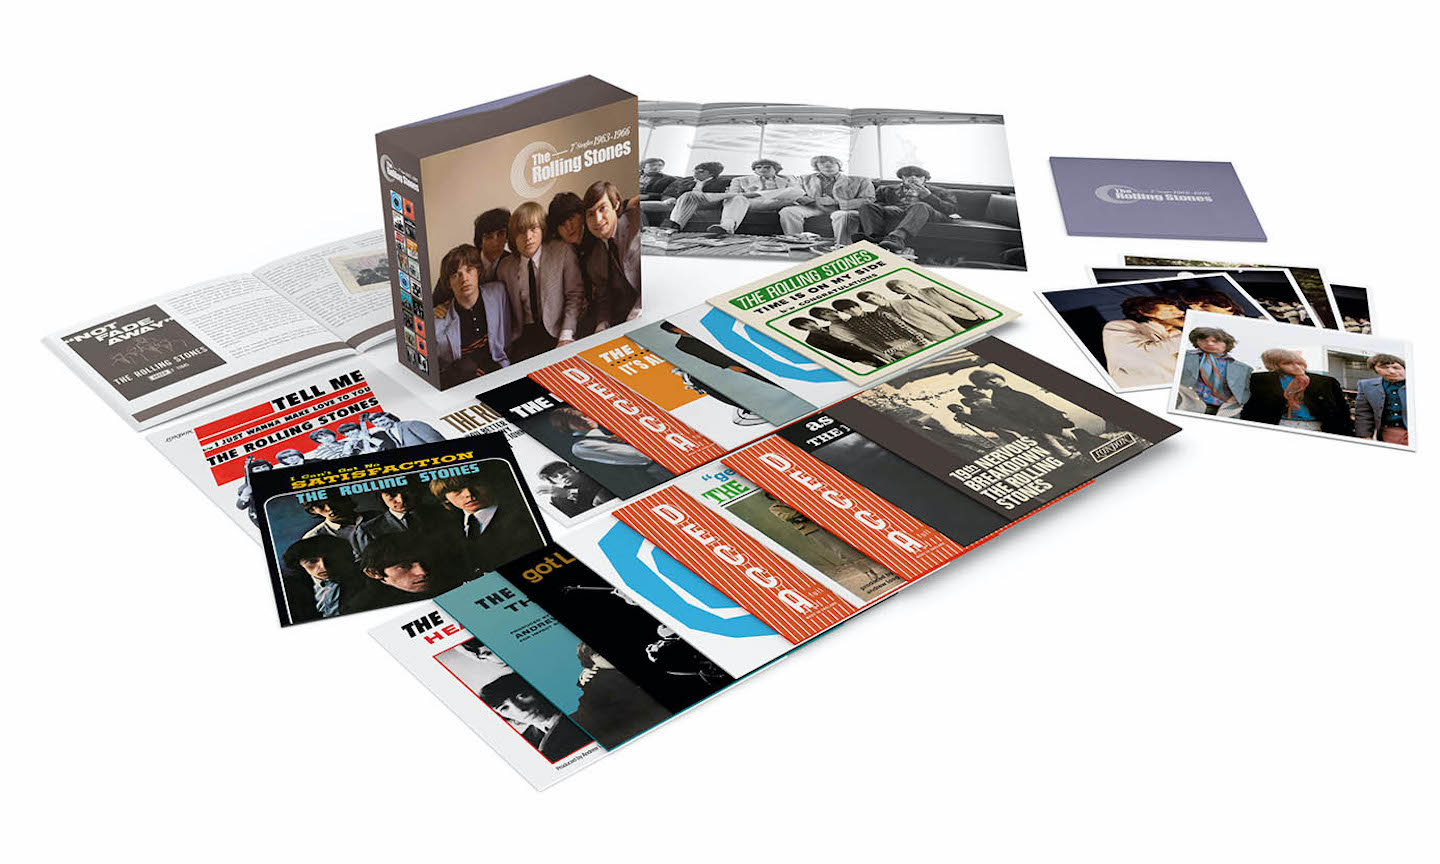 ABKCO To Release 'The Rolling Stones Singles 1963-1966' Box Set